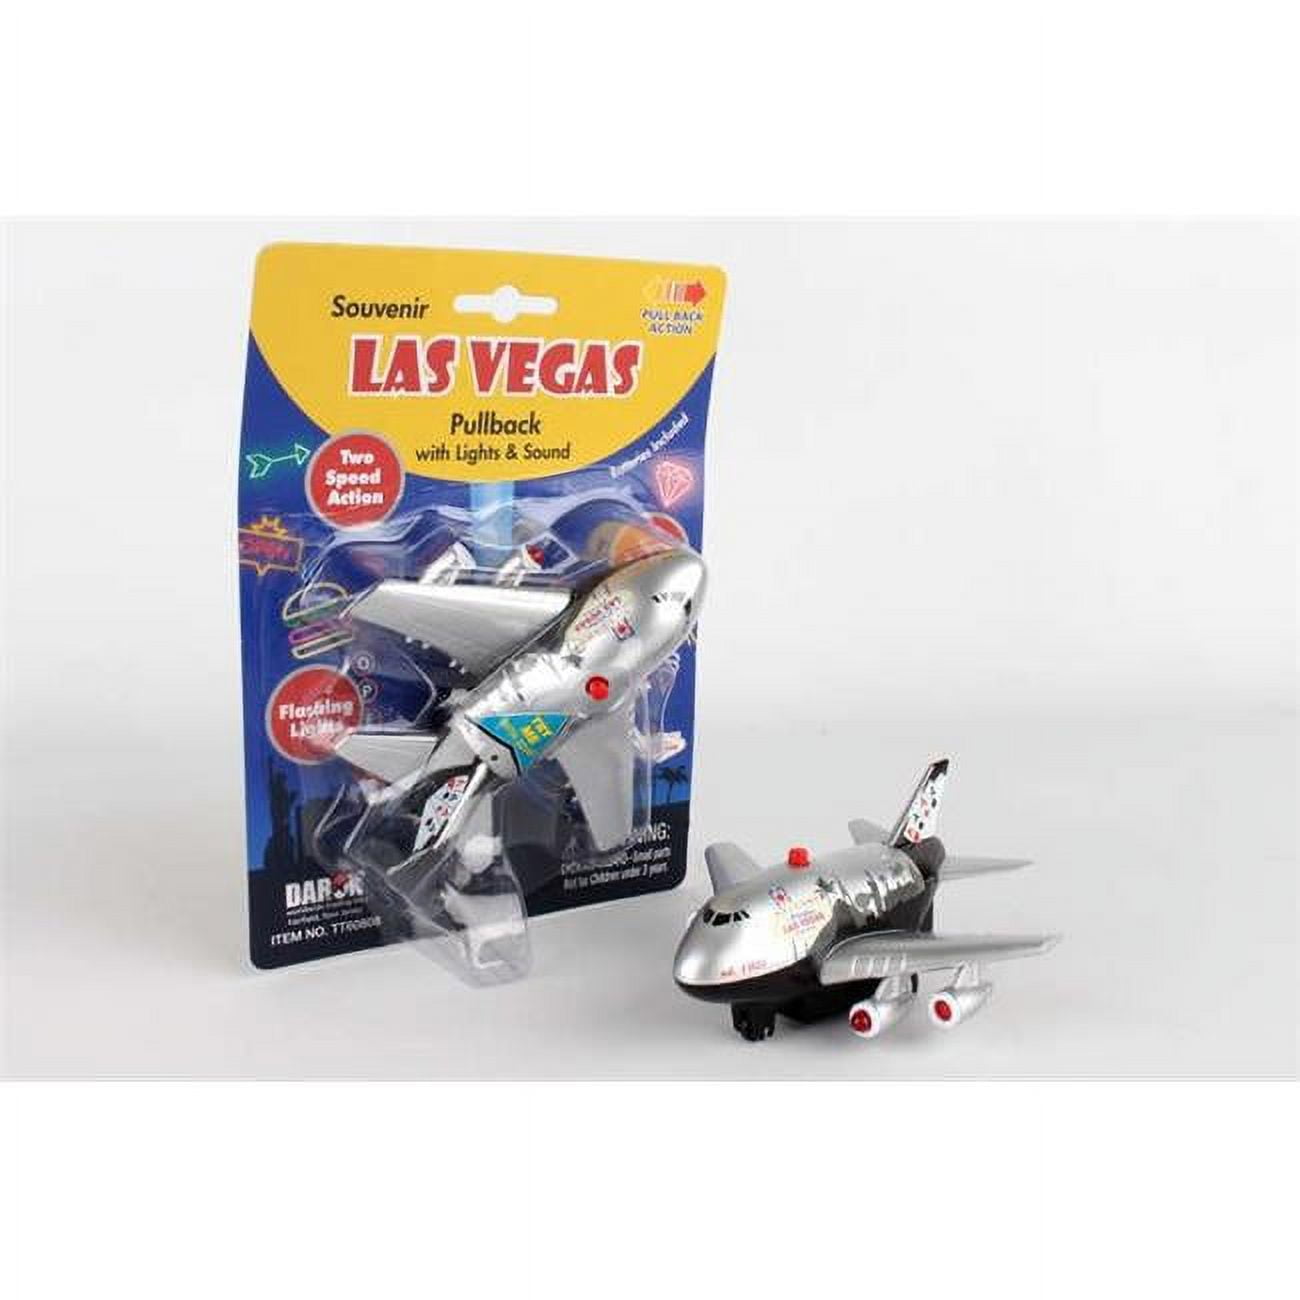 Picture of Toytech TT60808 Las Vegas Pullback with Light & Sound Air Plane Toy